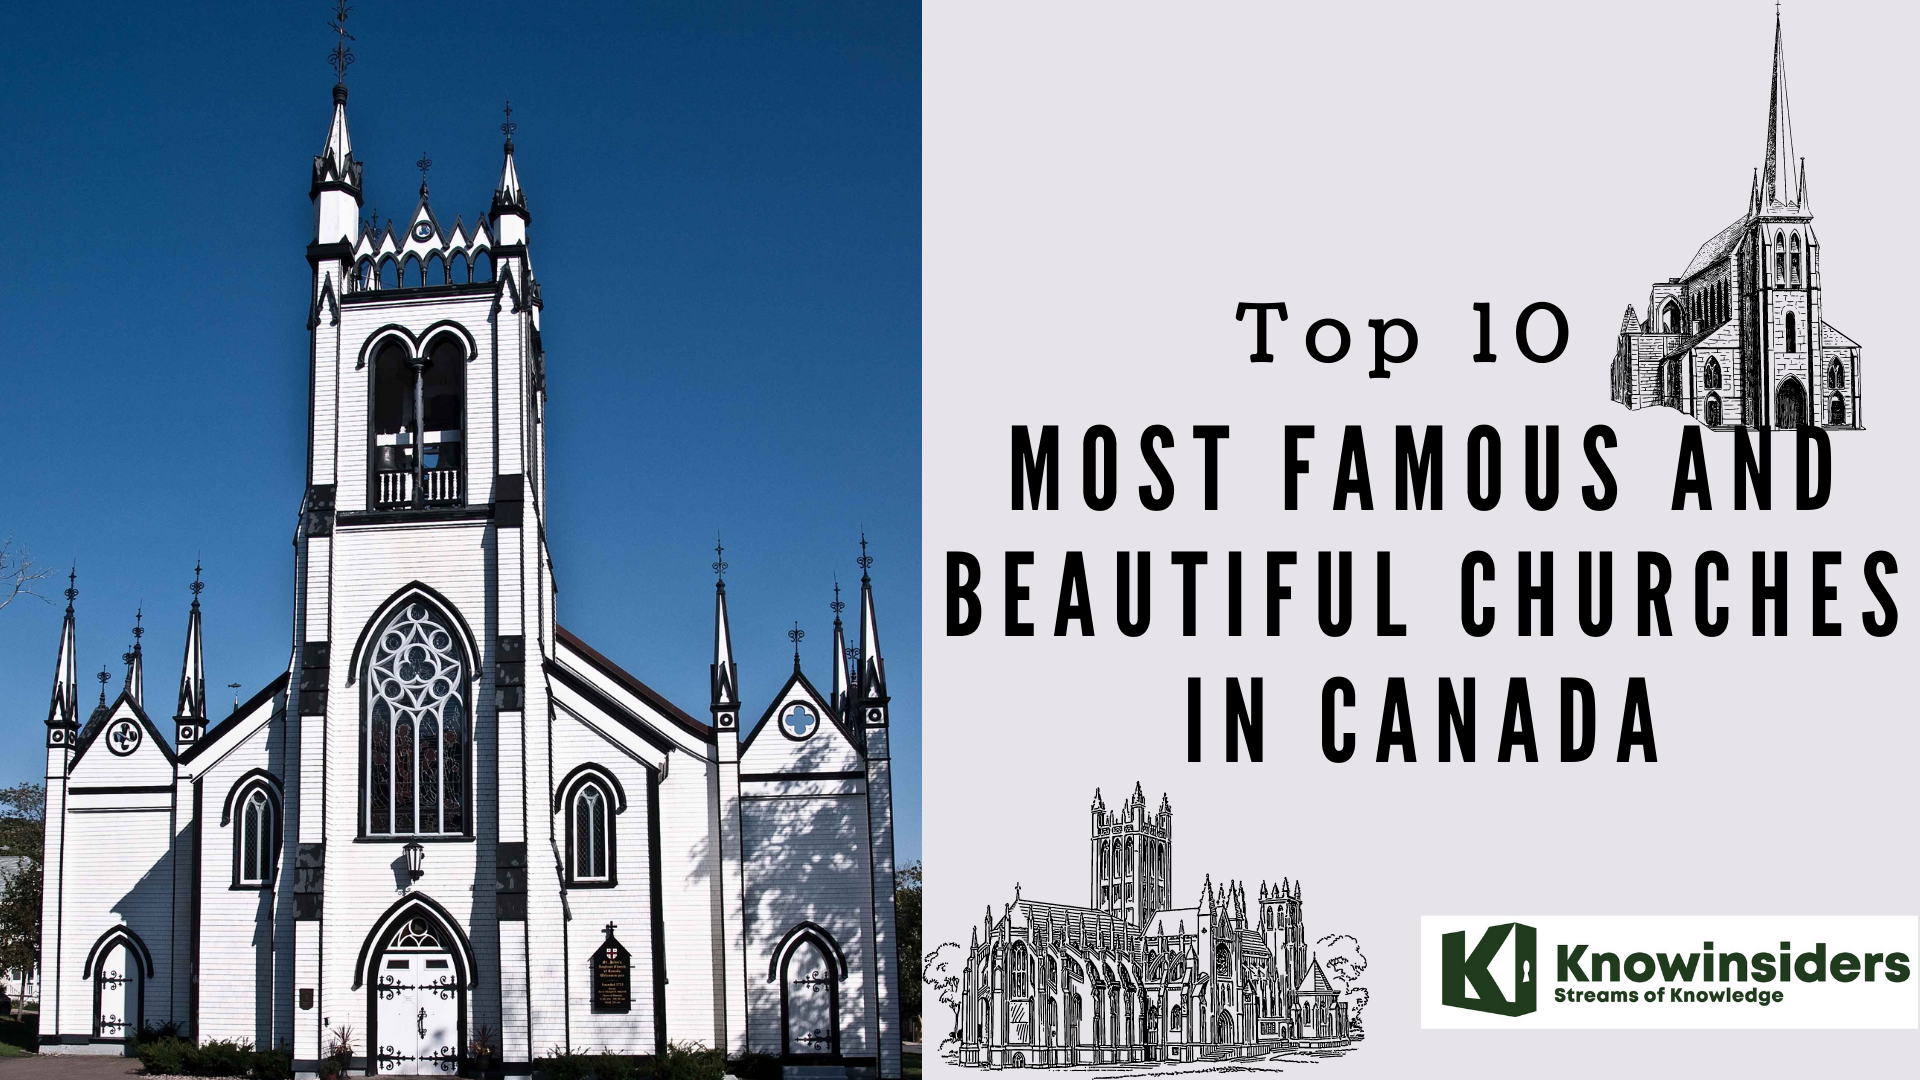 Top 10 most famous and beautiful churches in Canada 